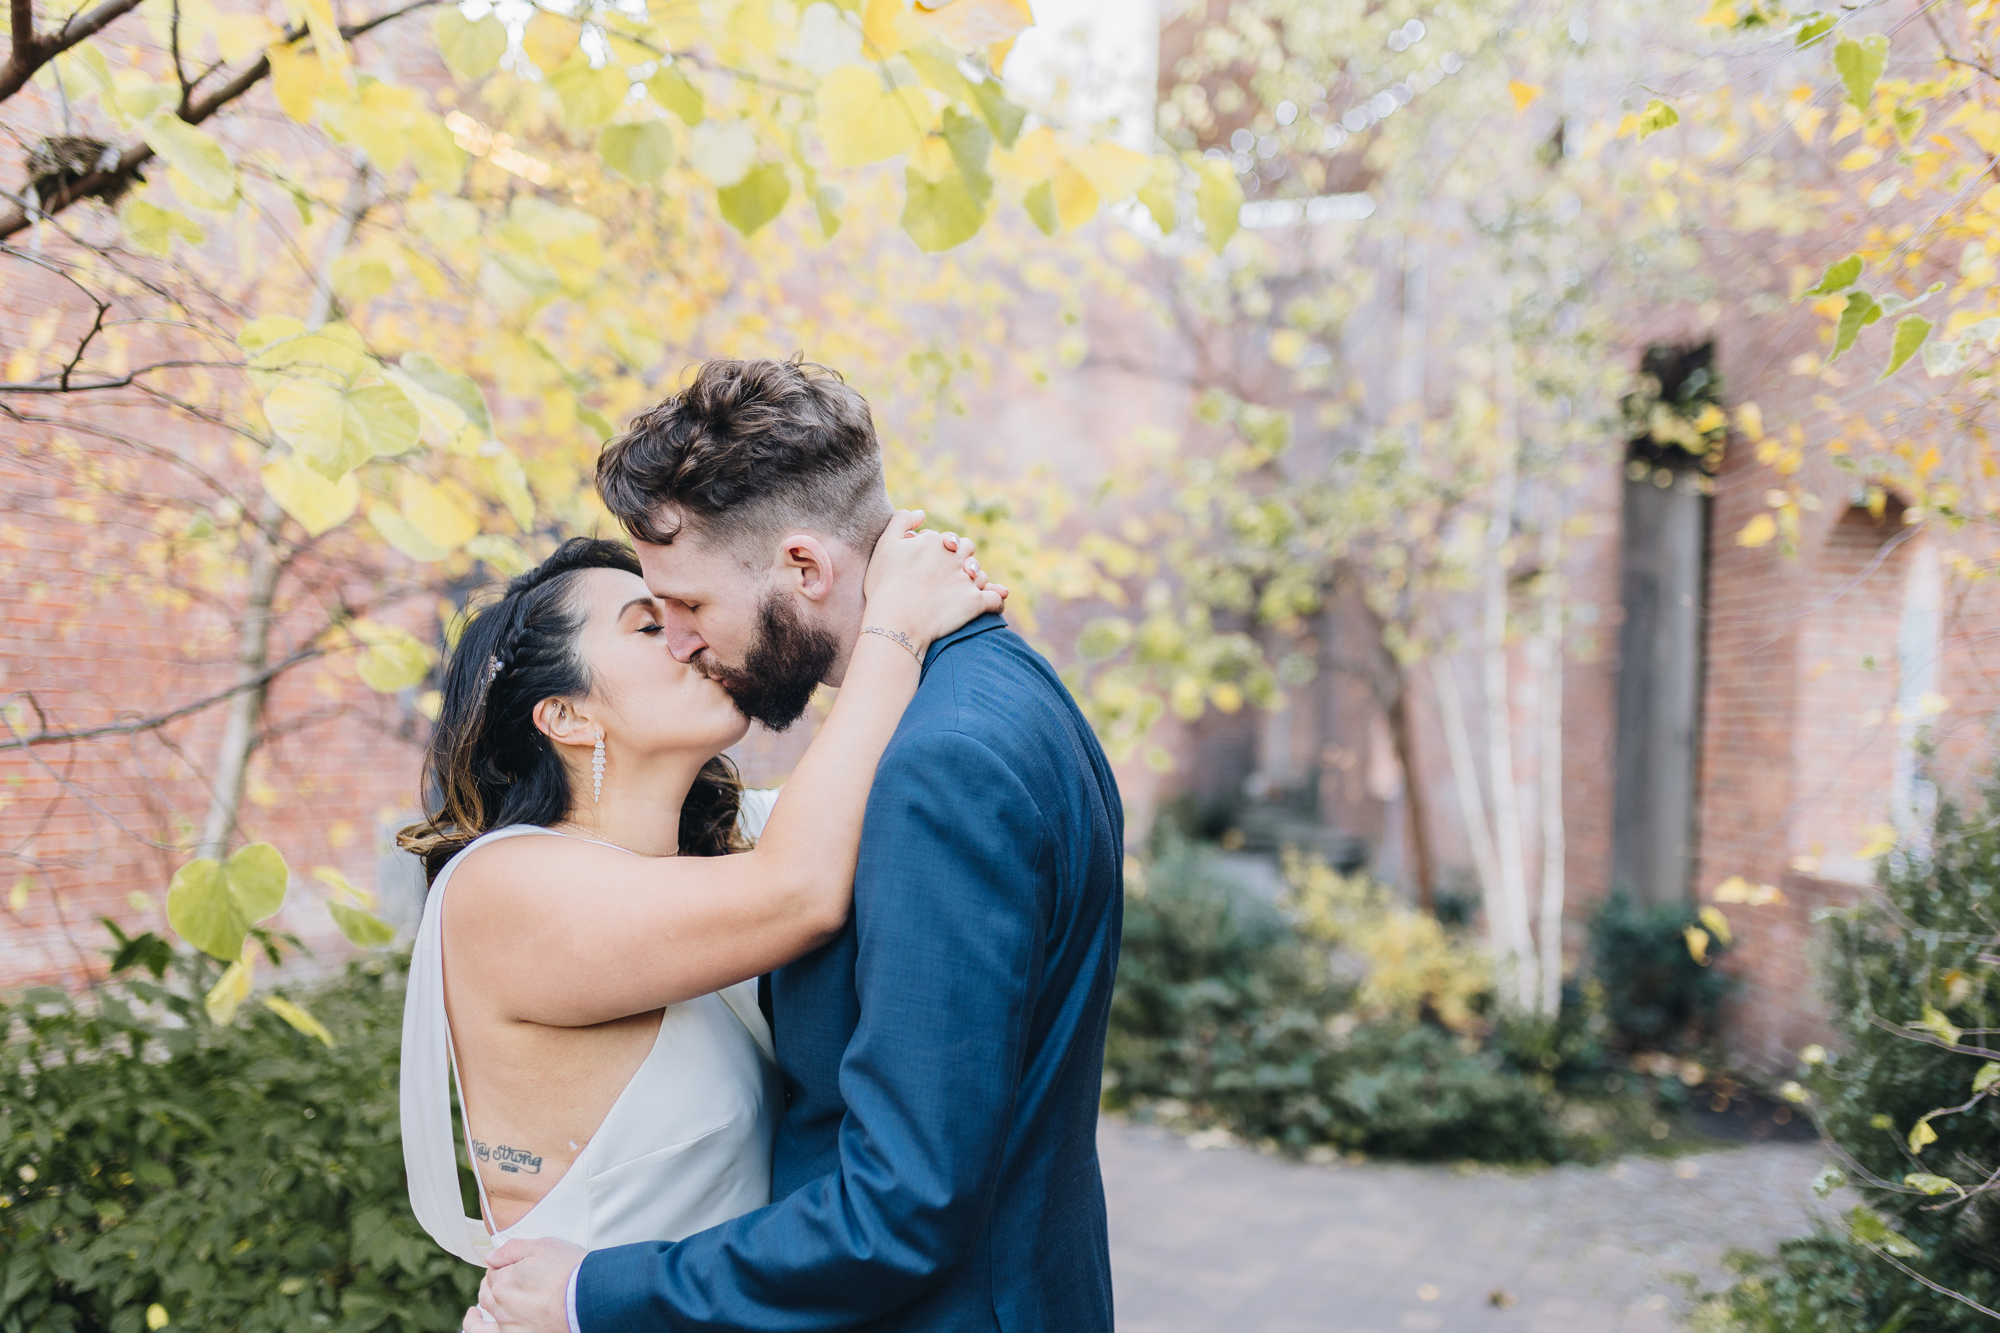 Pretty Fall DUMBO Elopement with New York views and foliage